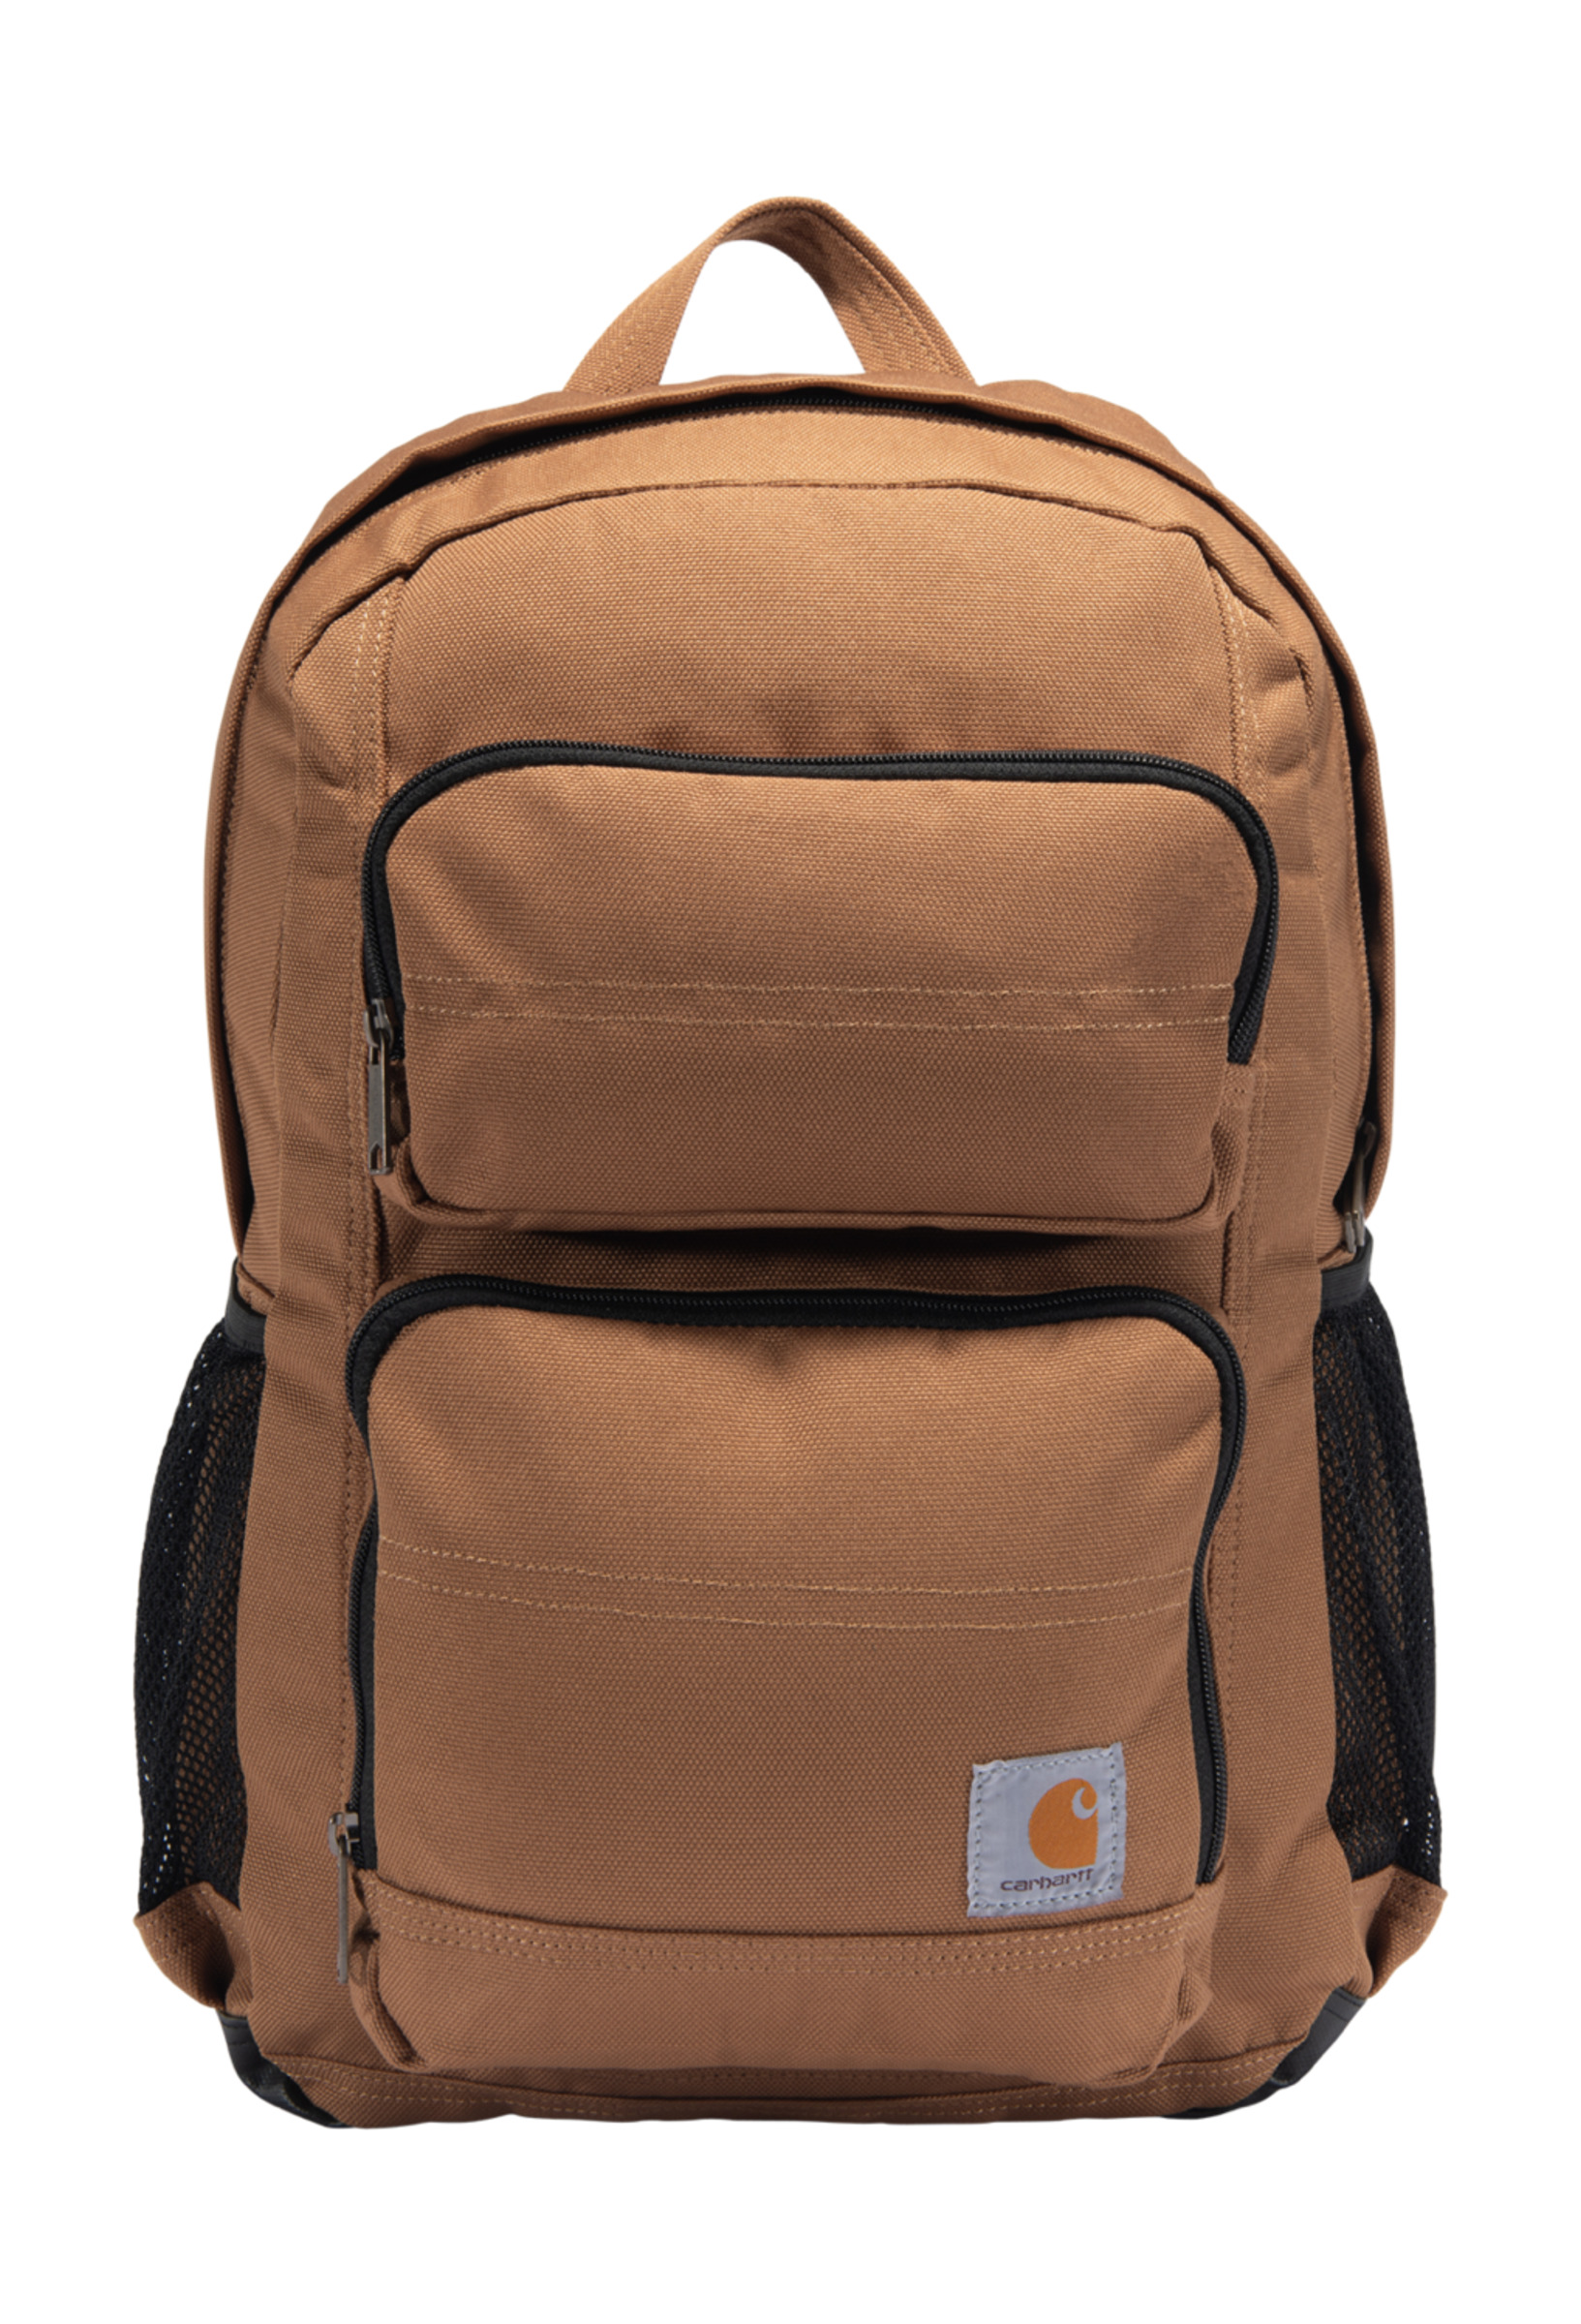 Carhartt 27l Single-Compartment Backpack - Carhartt® Brown - Os